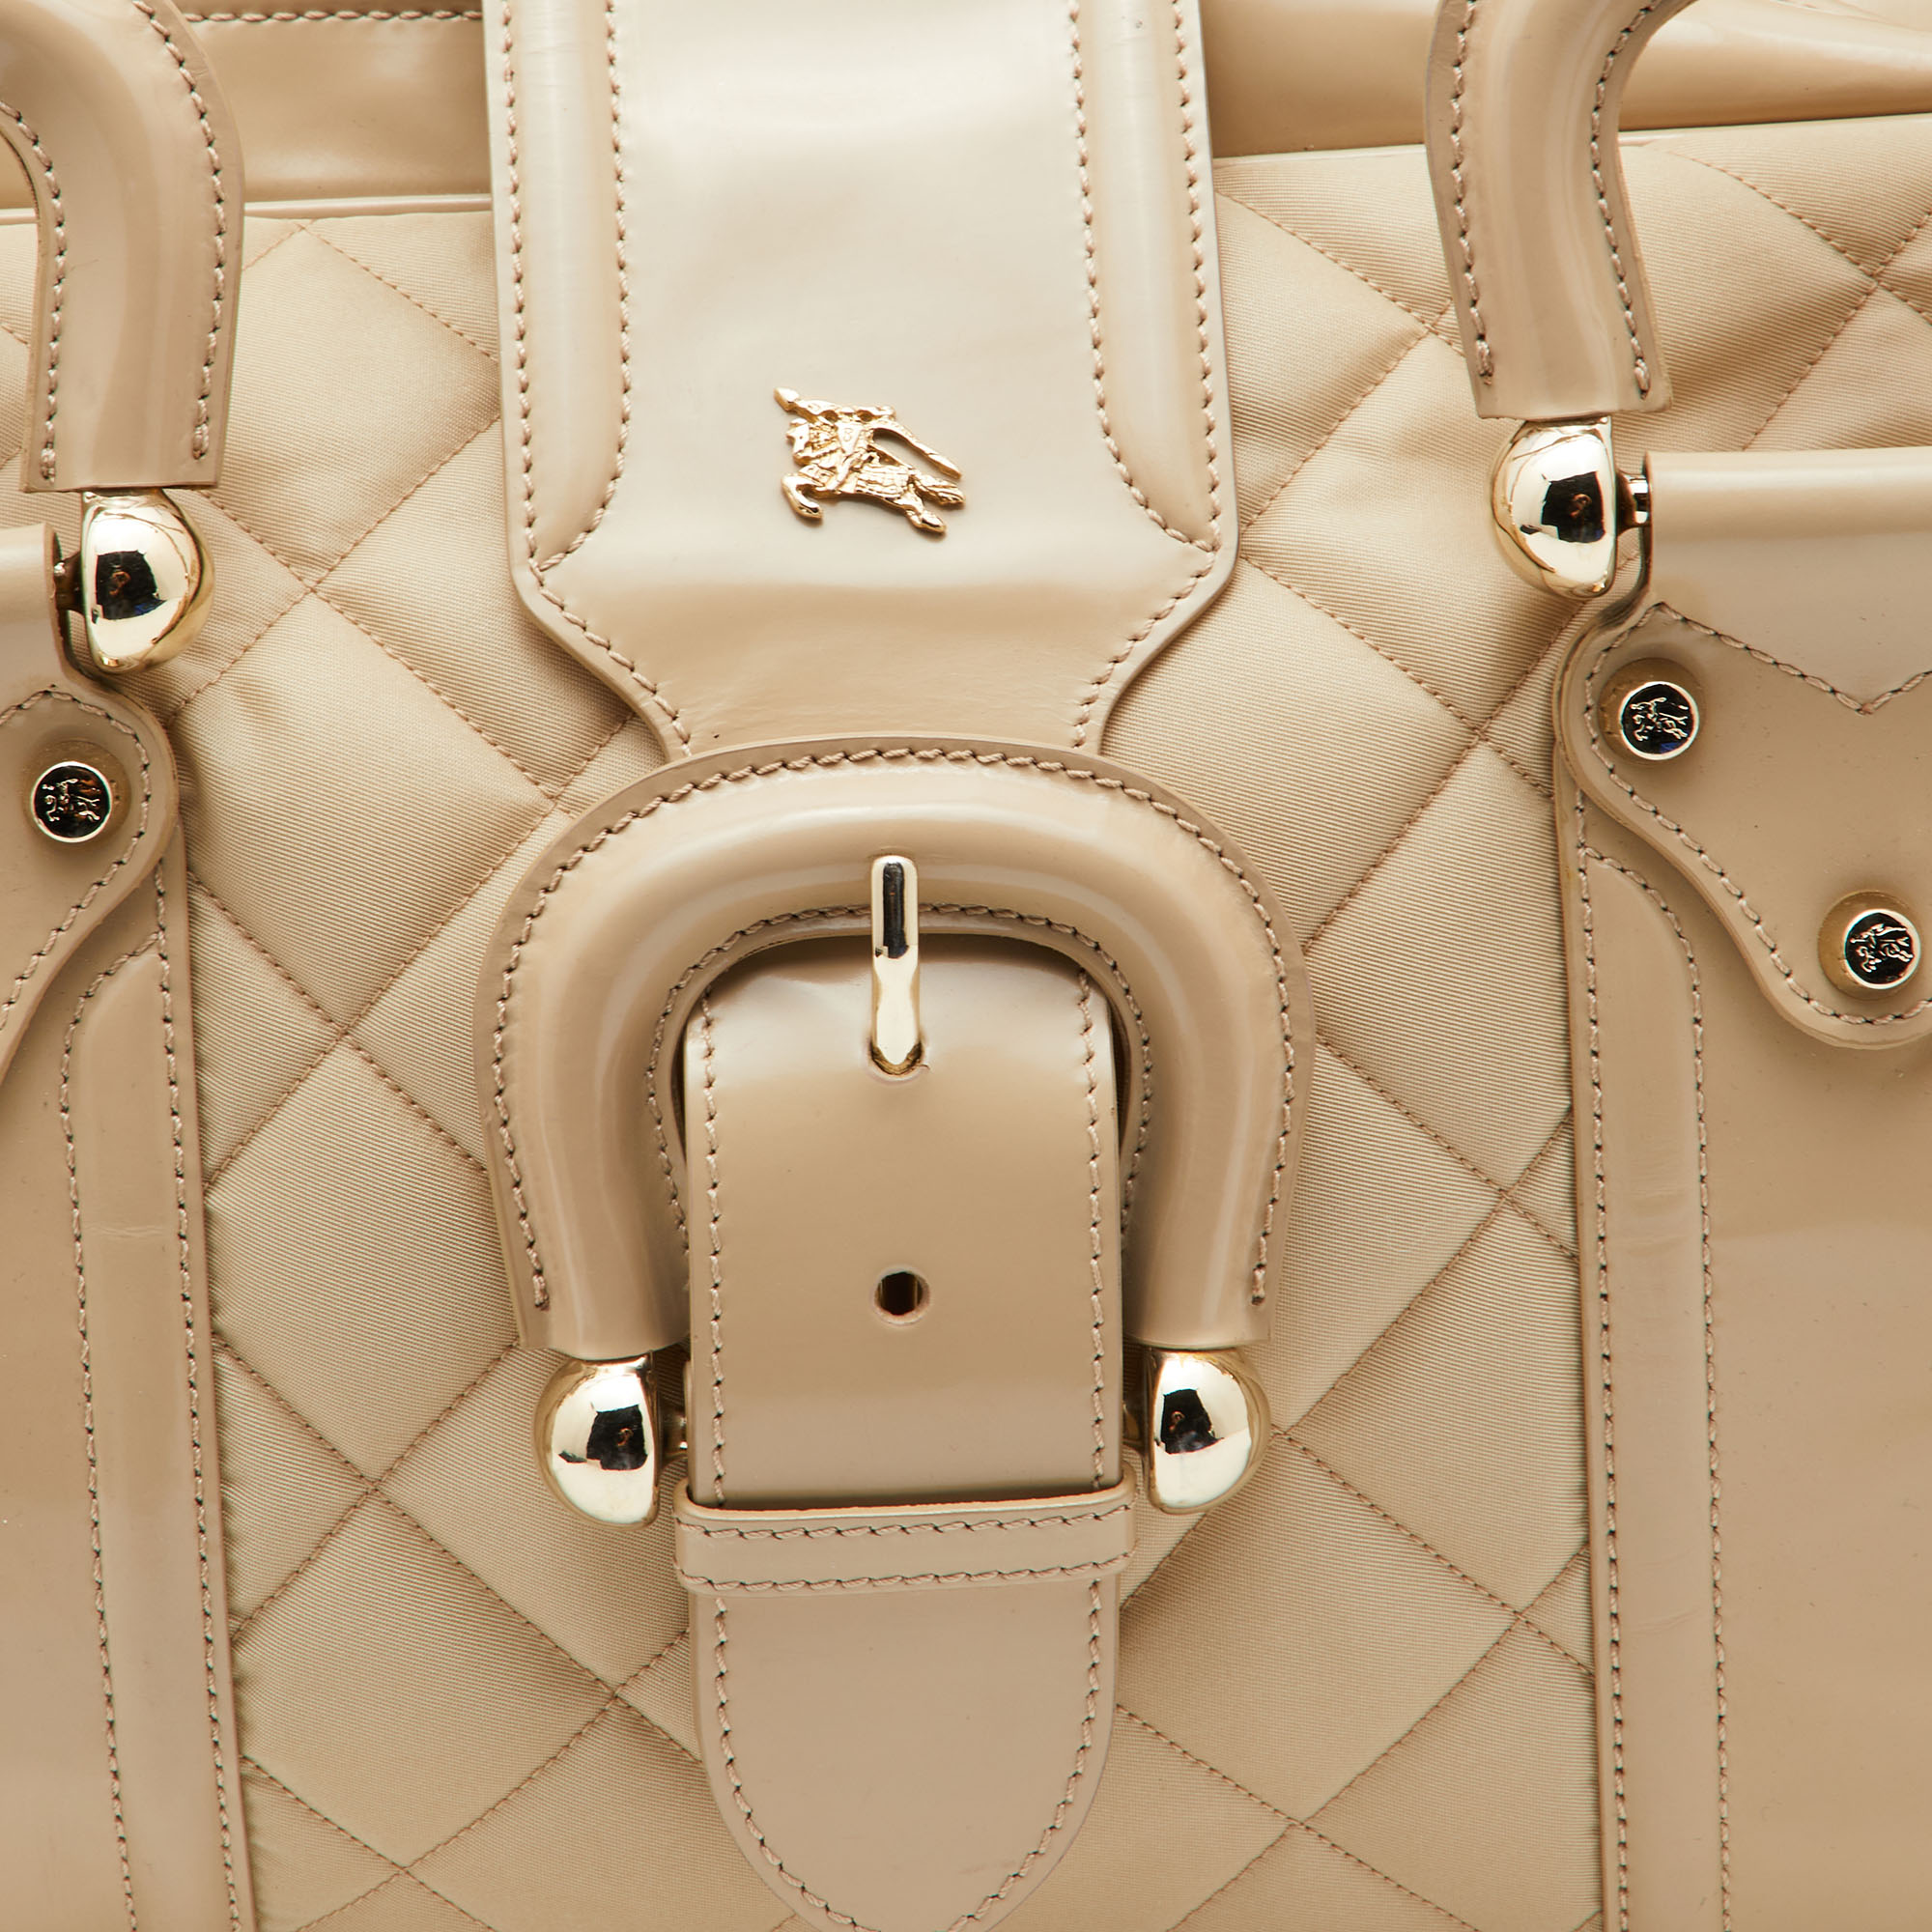 Burberry Beige Quilted Nylon And Patent Leather Manor Satchel